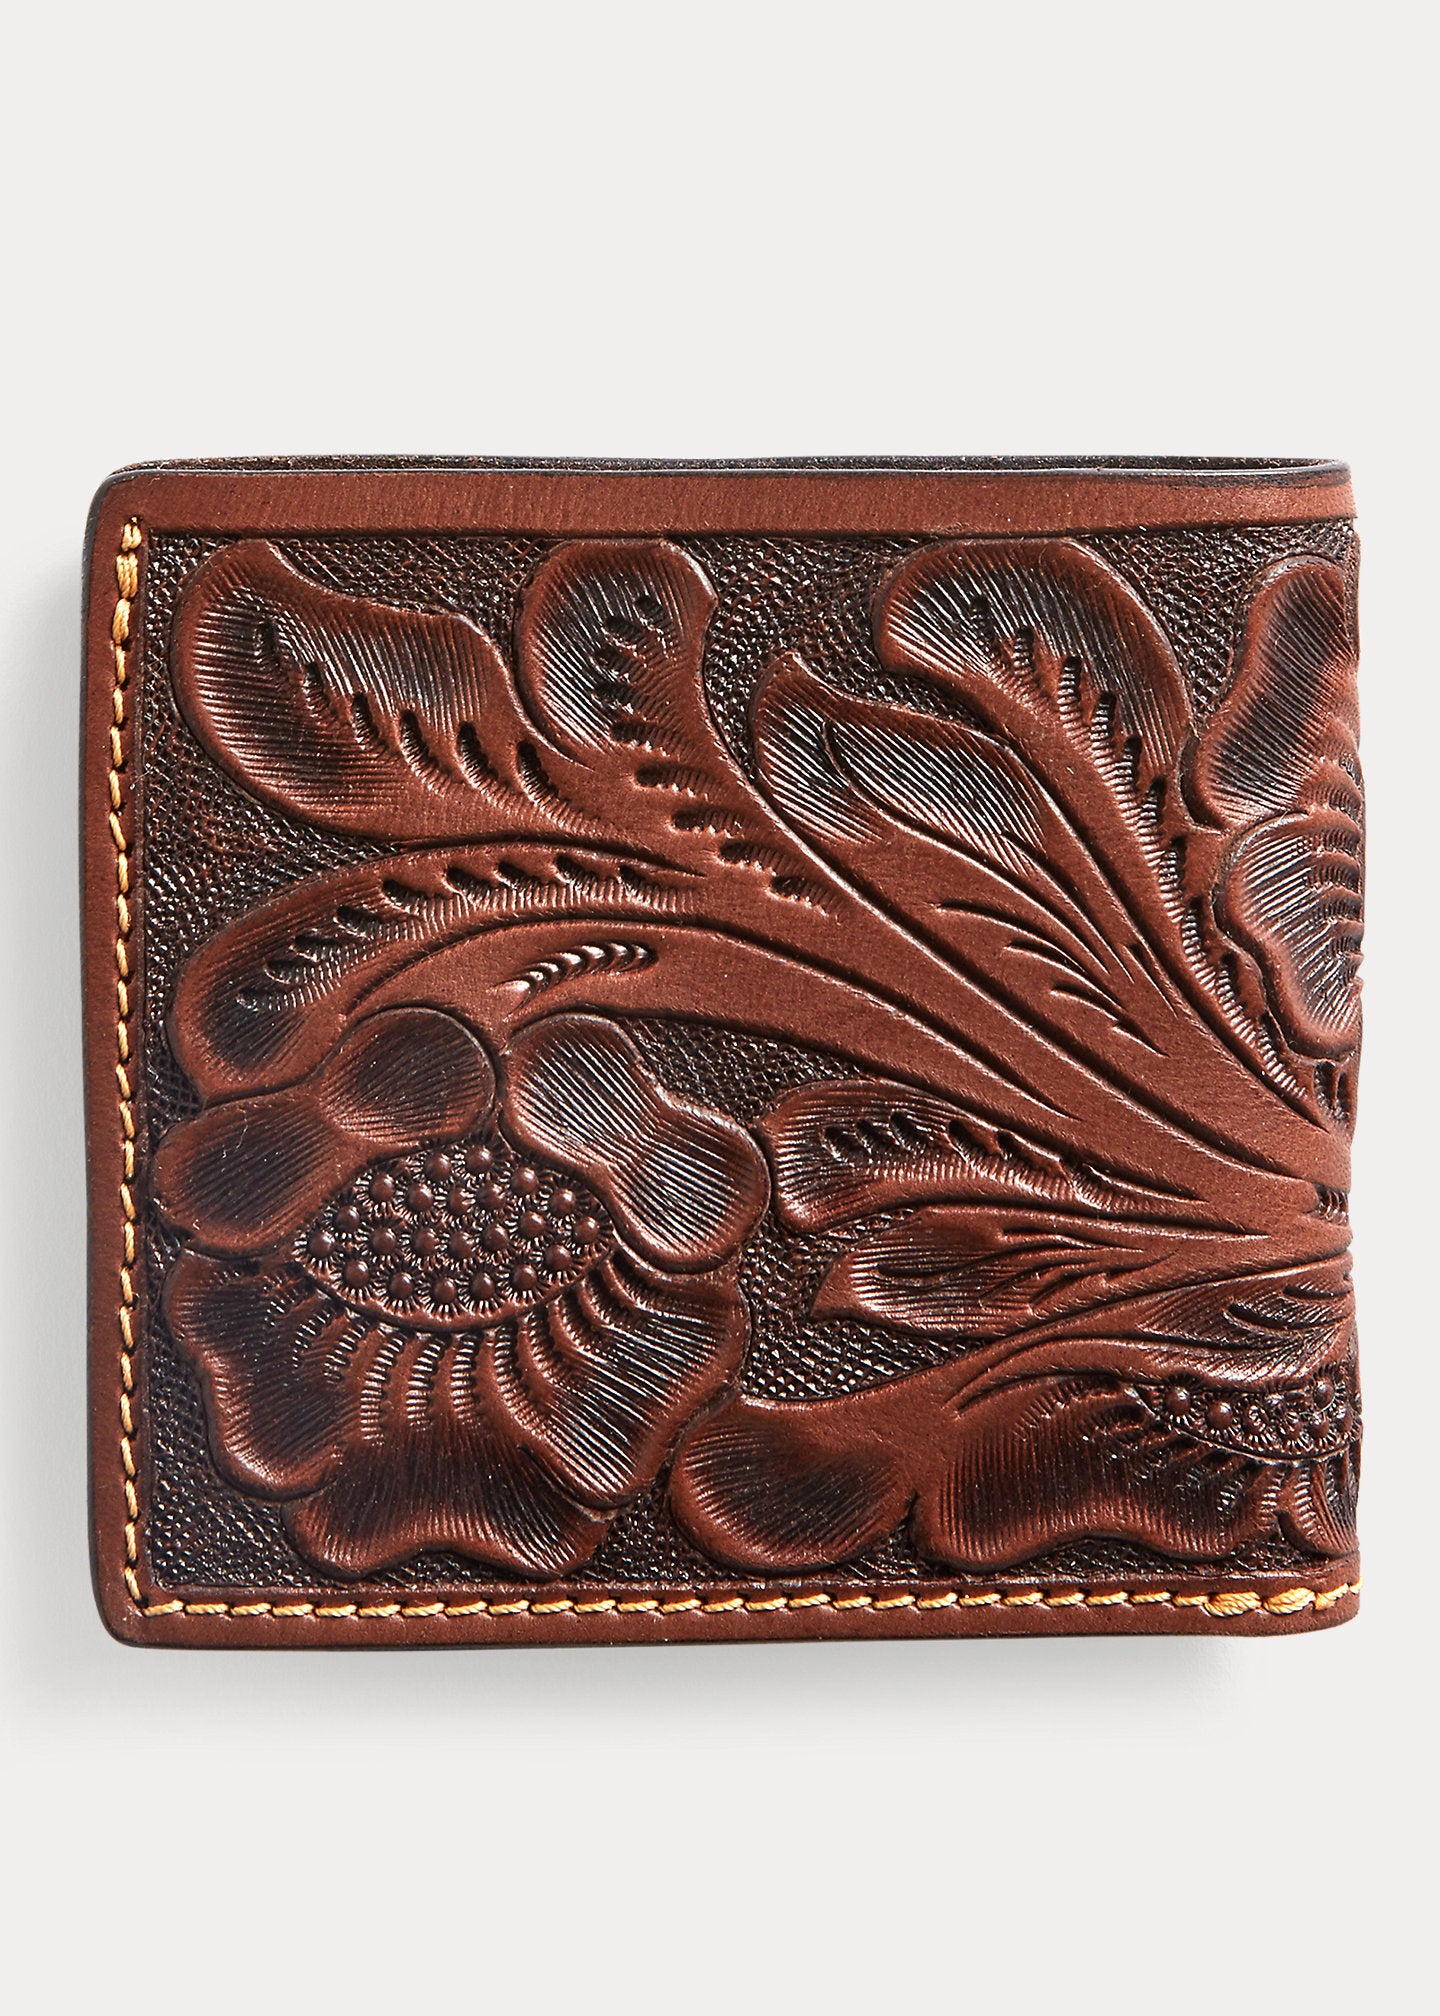 RRL Hand-Tooled Leather Billfold